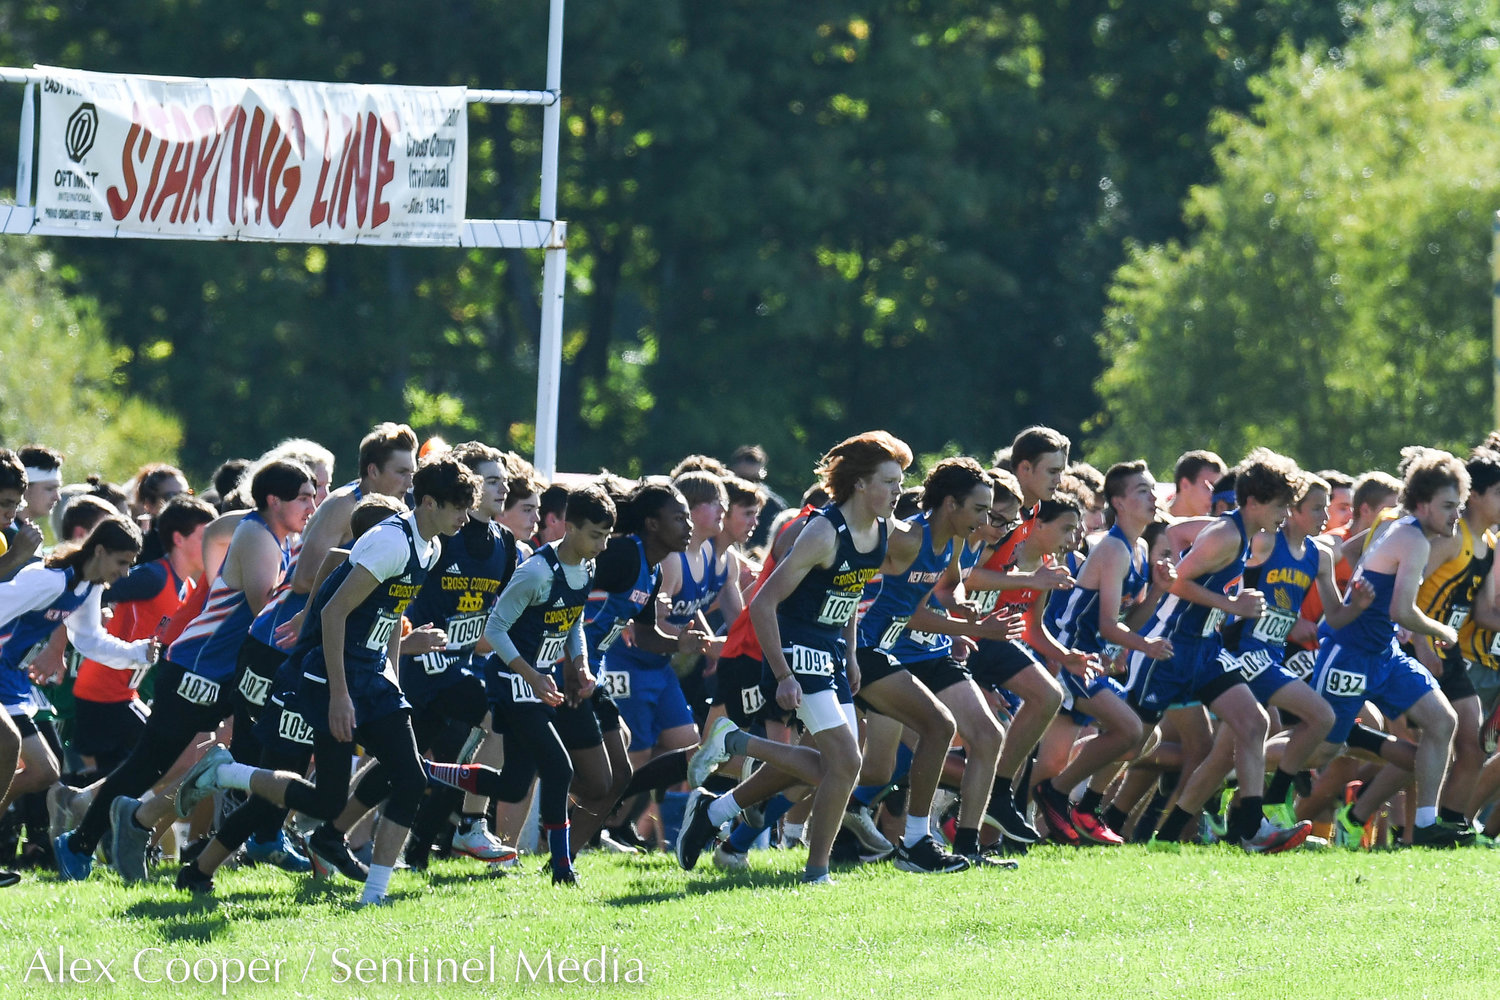 Varsity runners take off at the starting line during the 79th EJ Herrmann XC Invitational on Saturday, Sept. 24 at Proctor Park in Utica.